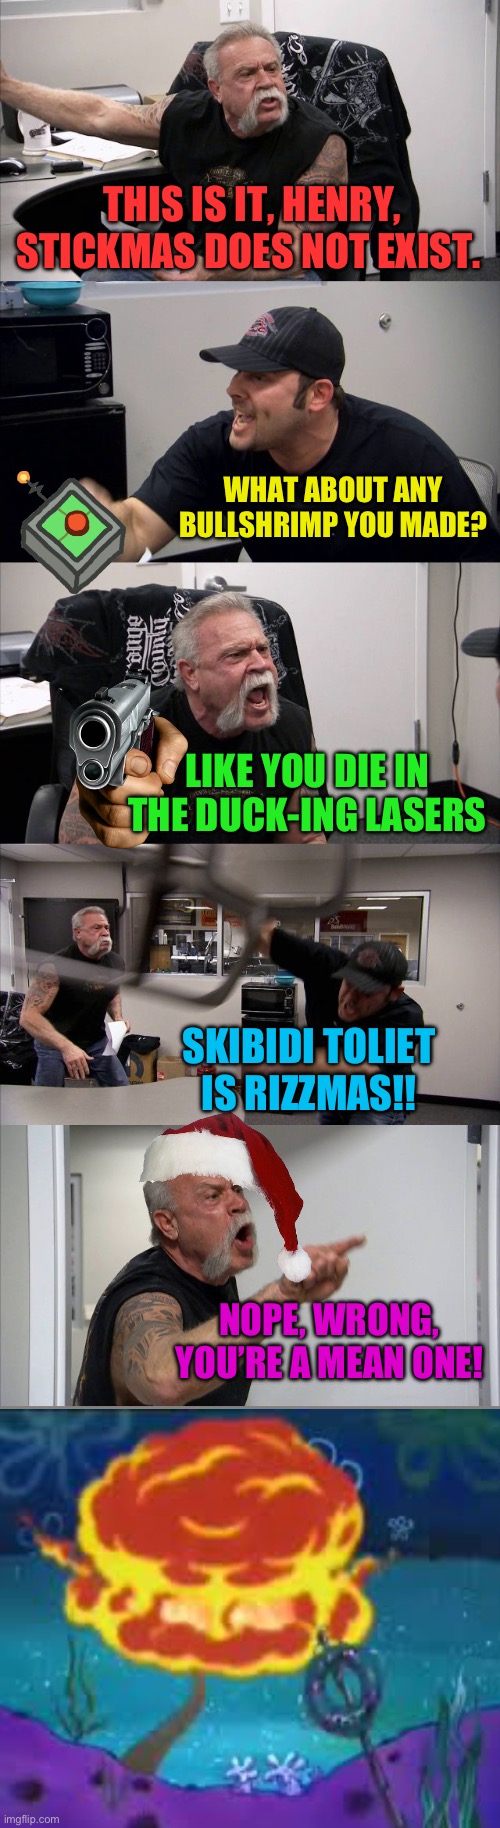 American Chopper Argument Meme | THIS IS IT, HENRY, STICKMAS DOES NOT EXIST. WHAT ABOUT ANY BULLSHRIMP YOU MADE? LIKE YOU DIE IN THE DUCK-ING LASERS SKIBIDI TOLIET IS RIZZMA | image tagged in memes,american chopper argument | made w/ Imgflip meme maker